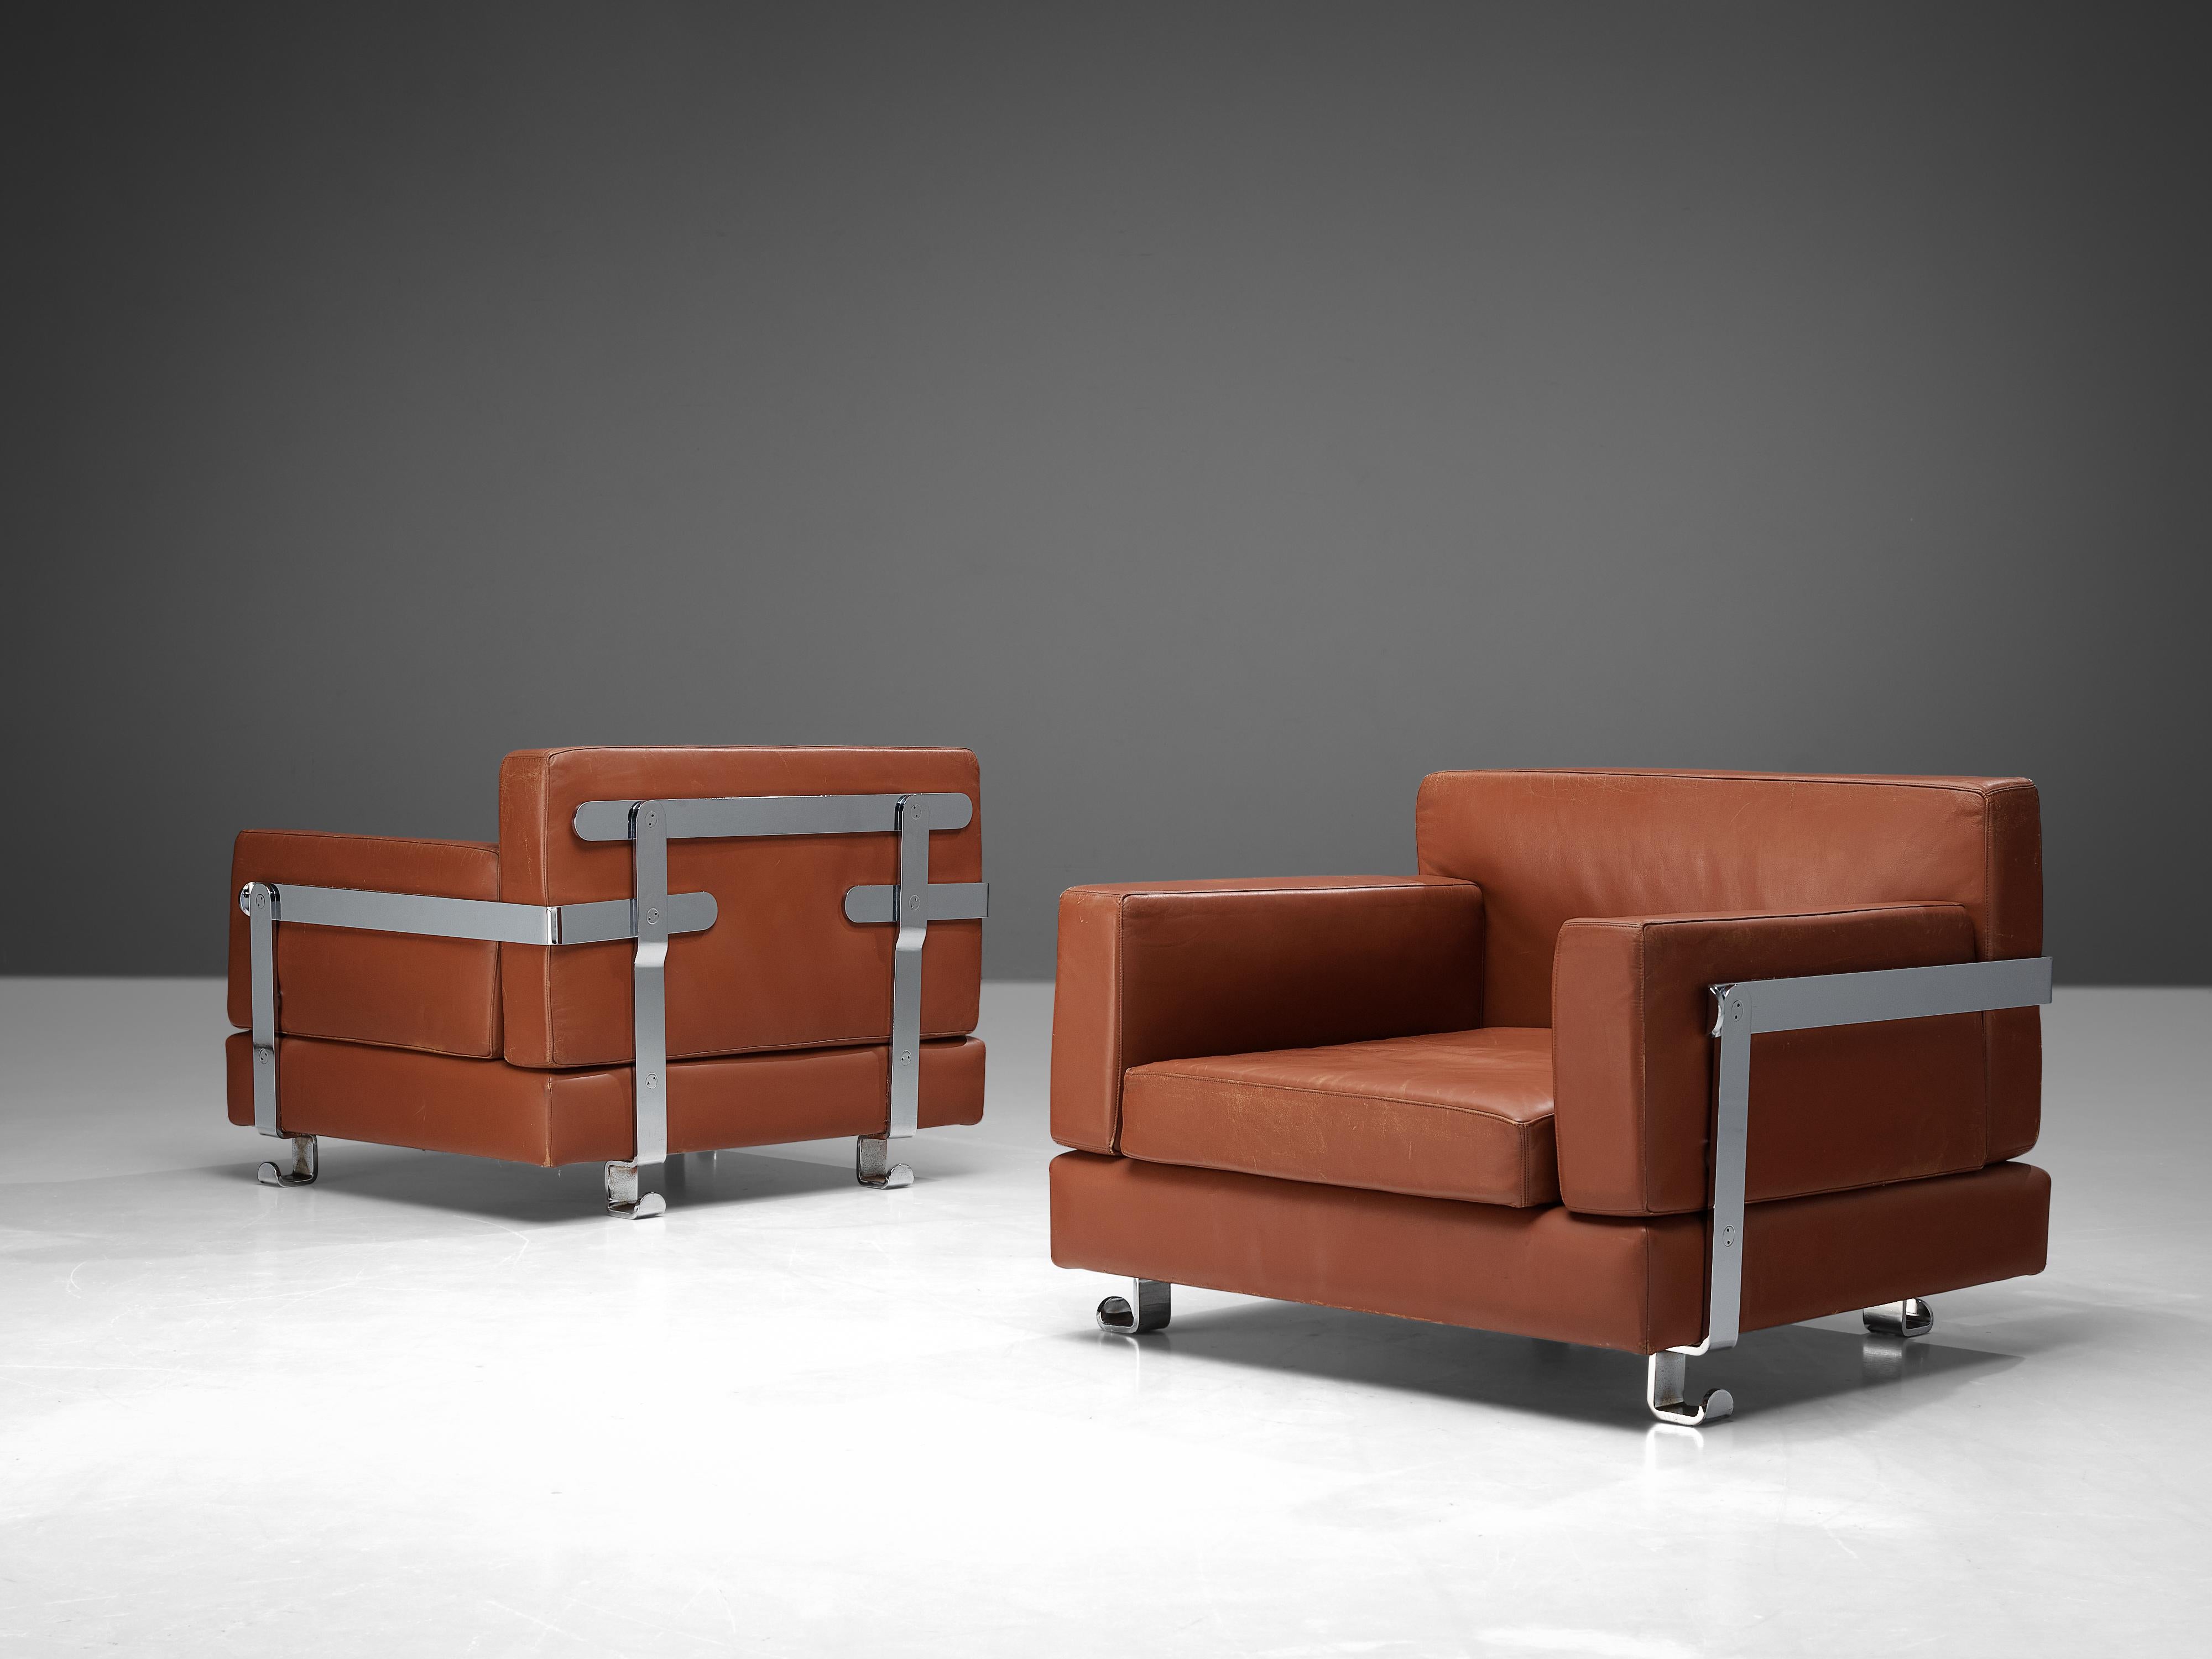 Luigi Caccia Dominioni for Azucena, pair of lounge chairs, leather, metal, Italy, 1960s 
 
This rare pair of cubist lounge chairs executed in brown leather are designed by Luigi Caccia Dominioni for Azucena. The design is characterized by